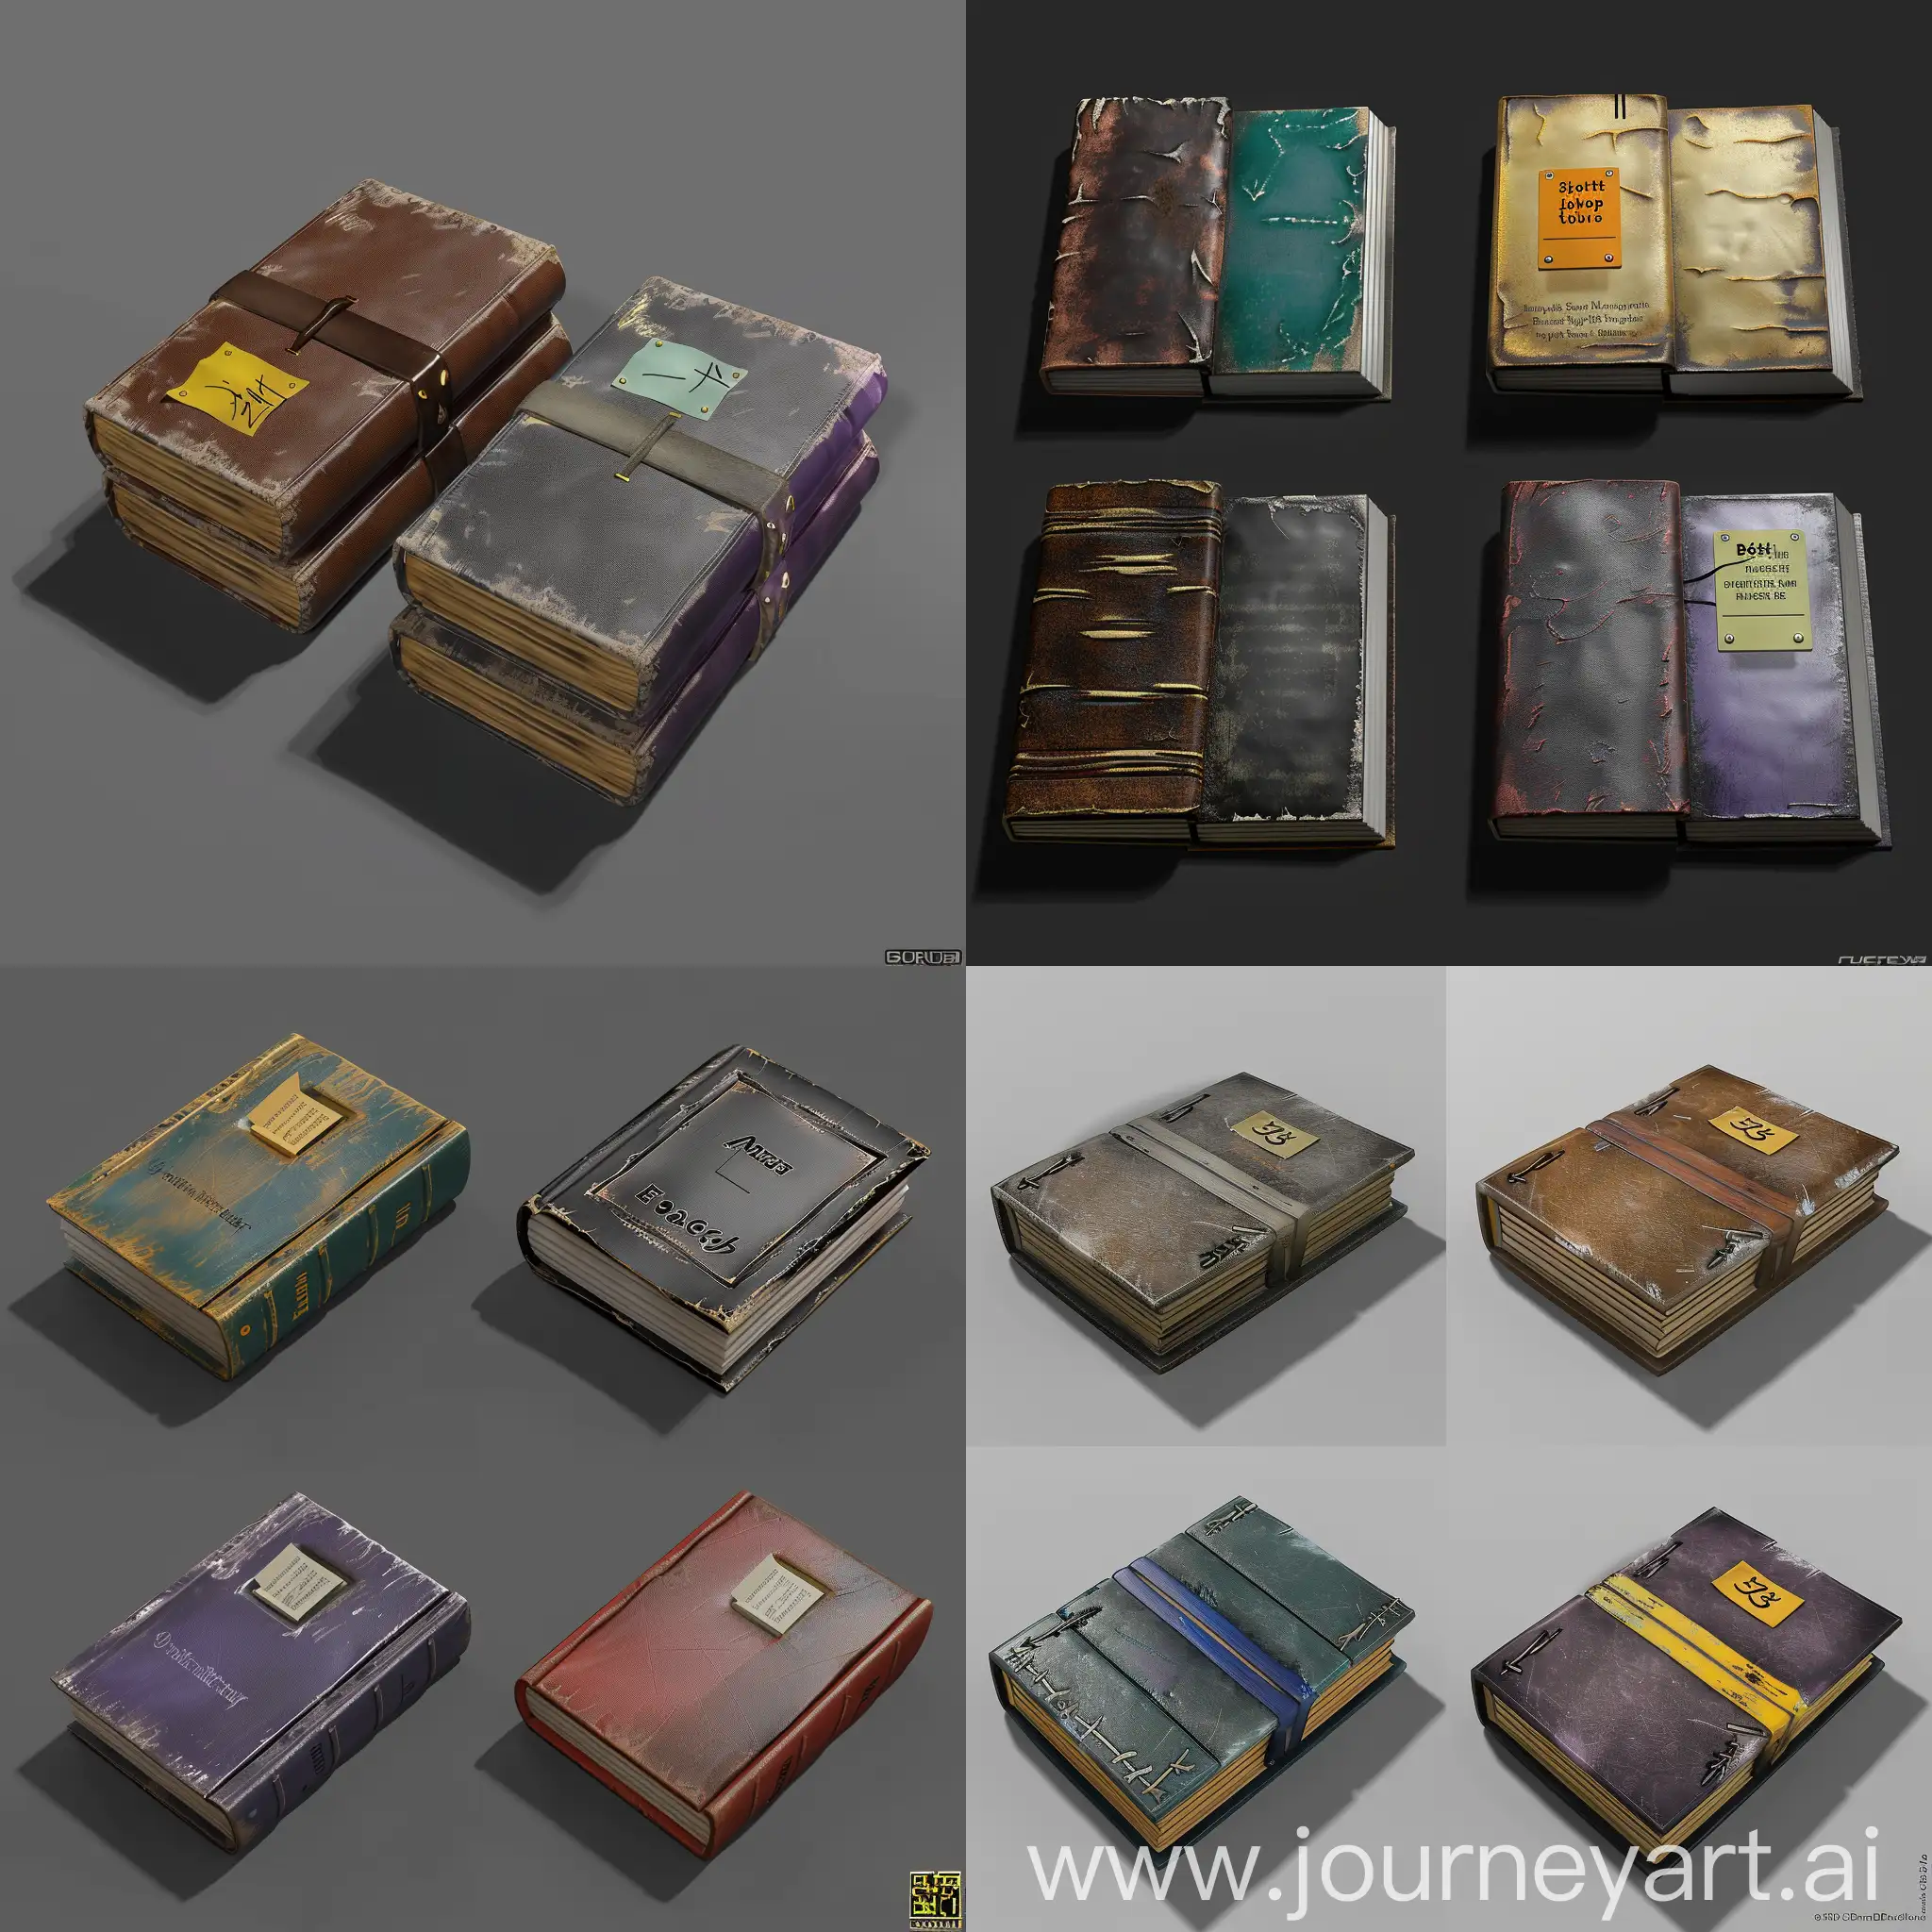 https://imgbly.com/ib/NhVu9noHmK.jpg realistic worn thin books without text in style of realistic 3d blender game asset, leather cover